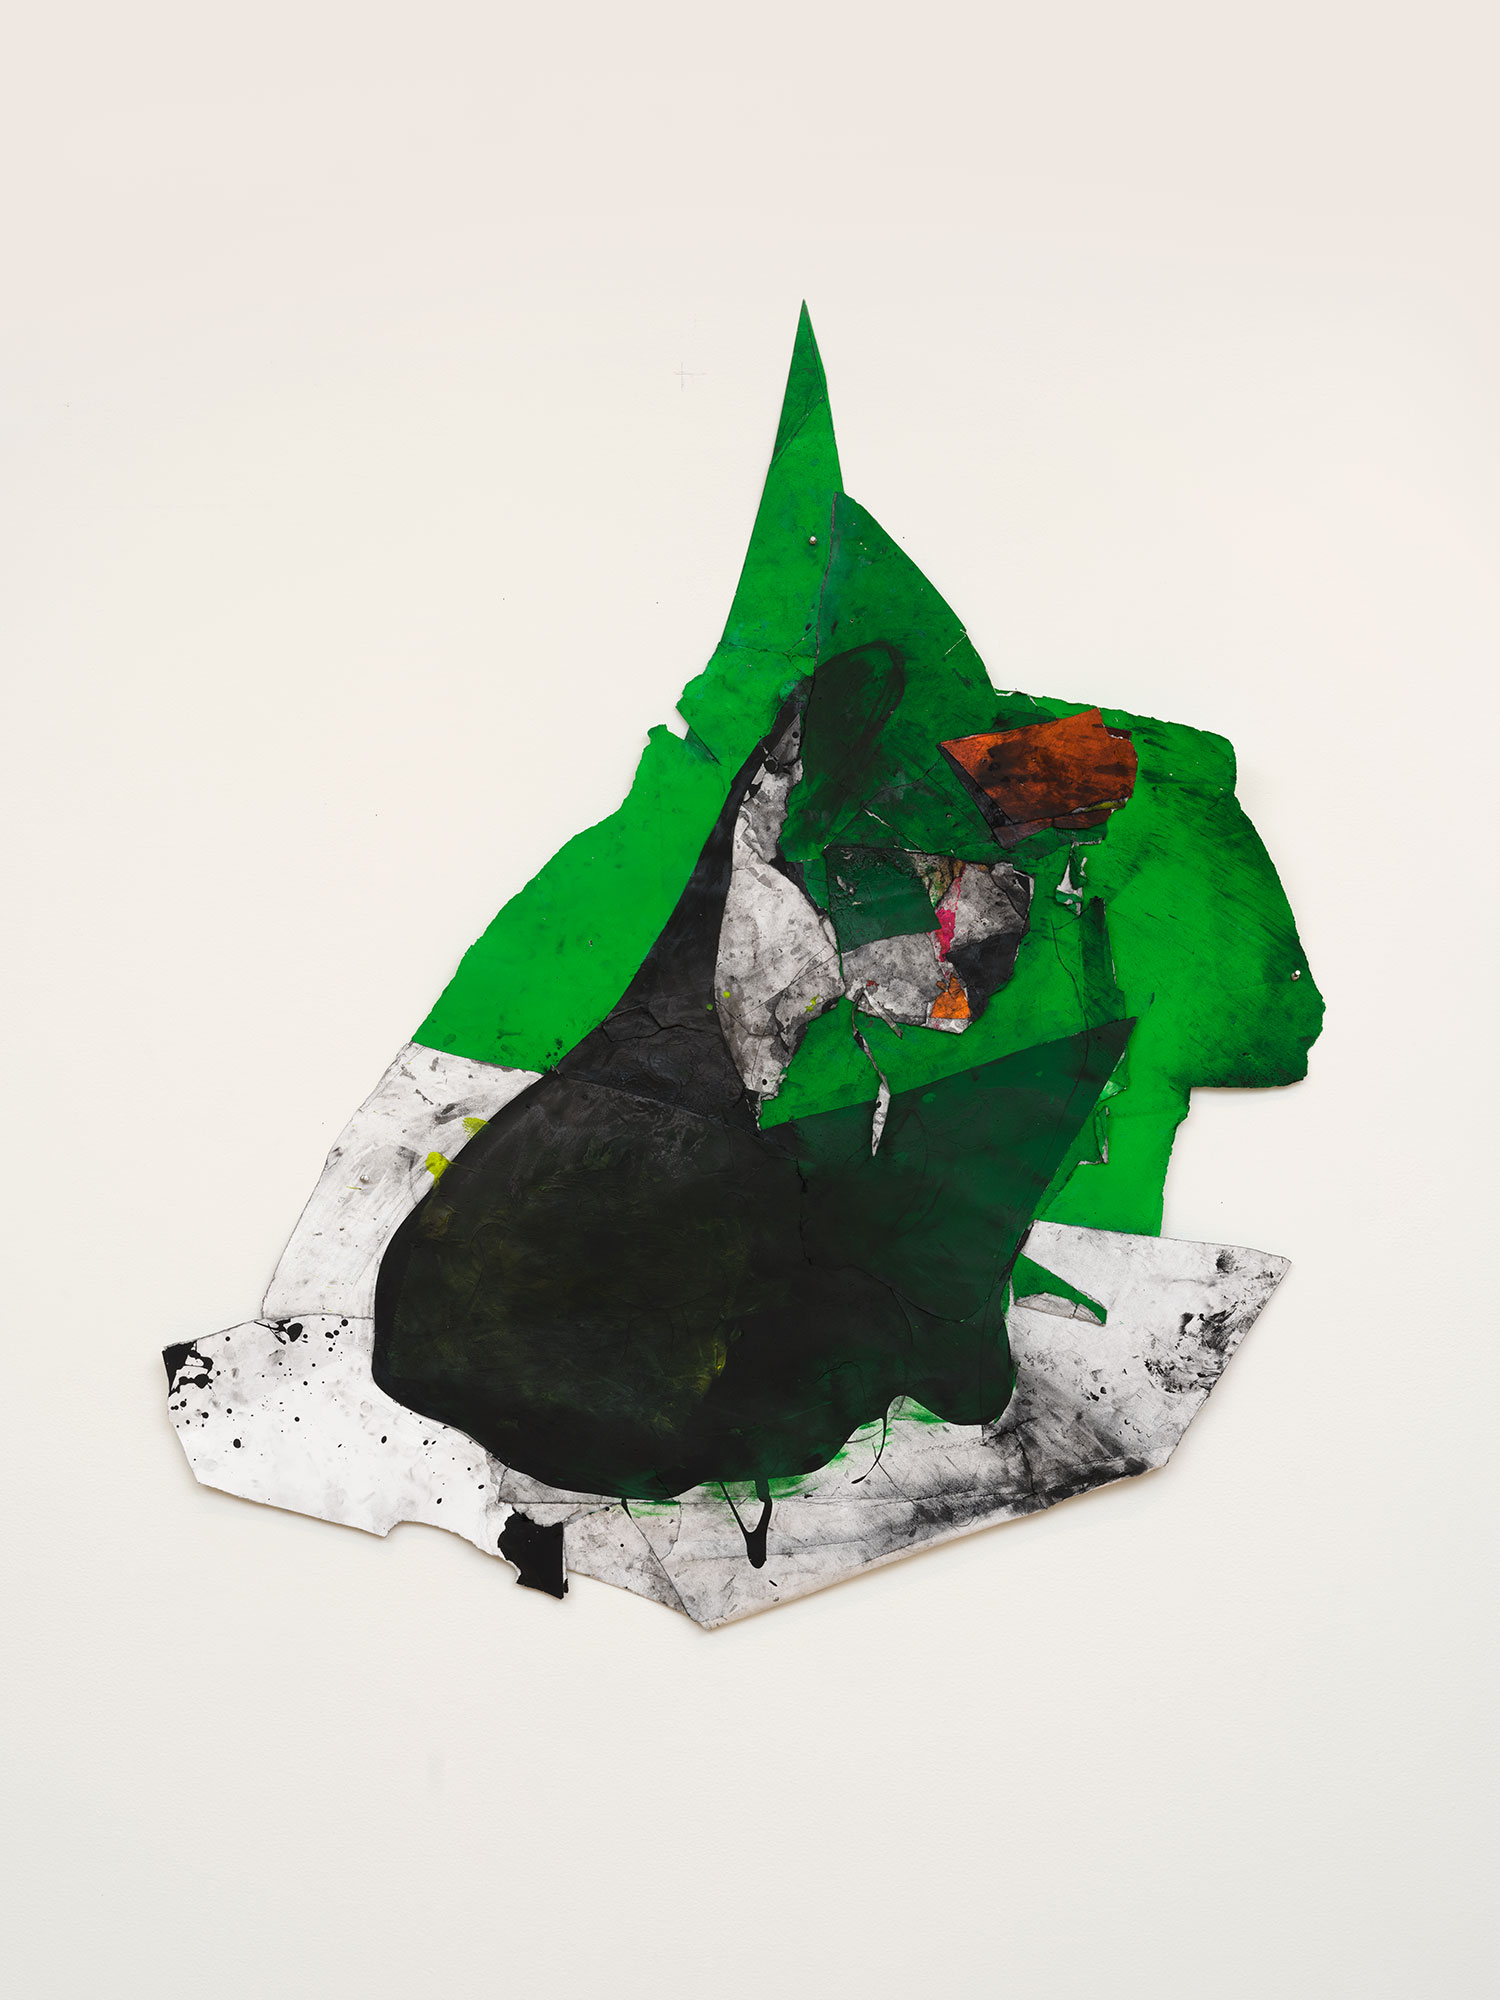 Wesley Kimler / 
The Green Hotel, 2022 / 
vinyl acrylic, charcoal, and graphite on rag paper / 
53 x 45 in. (134.6 x 114.3 cm)